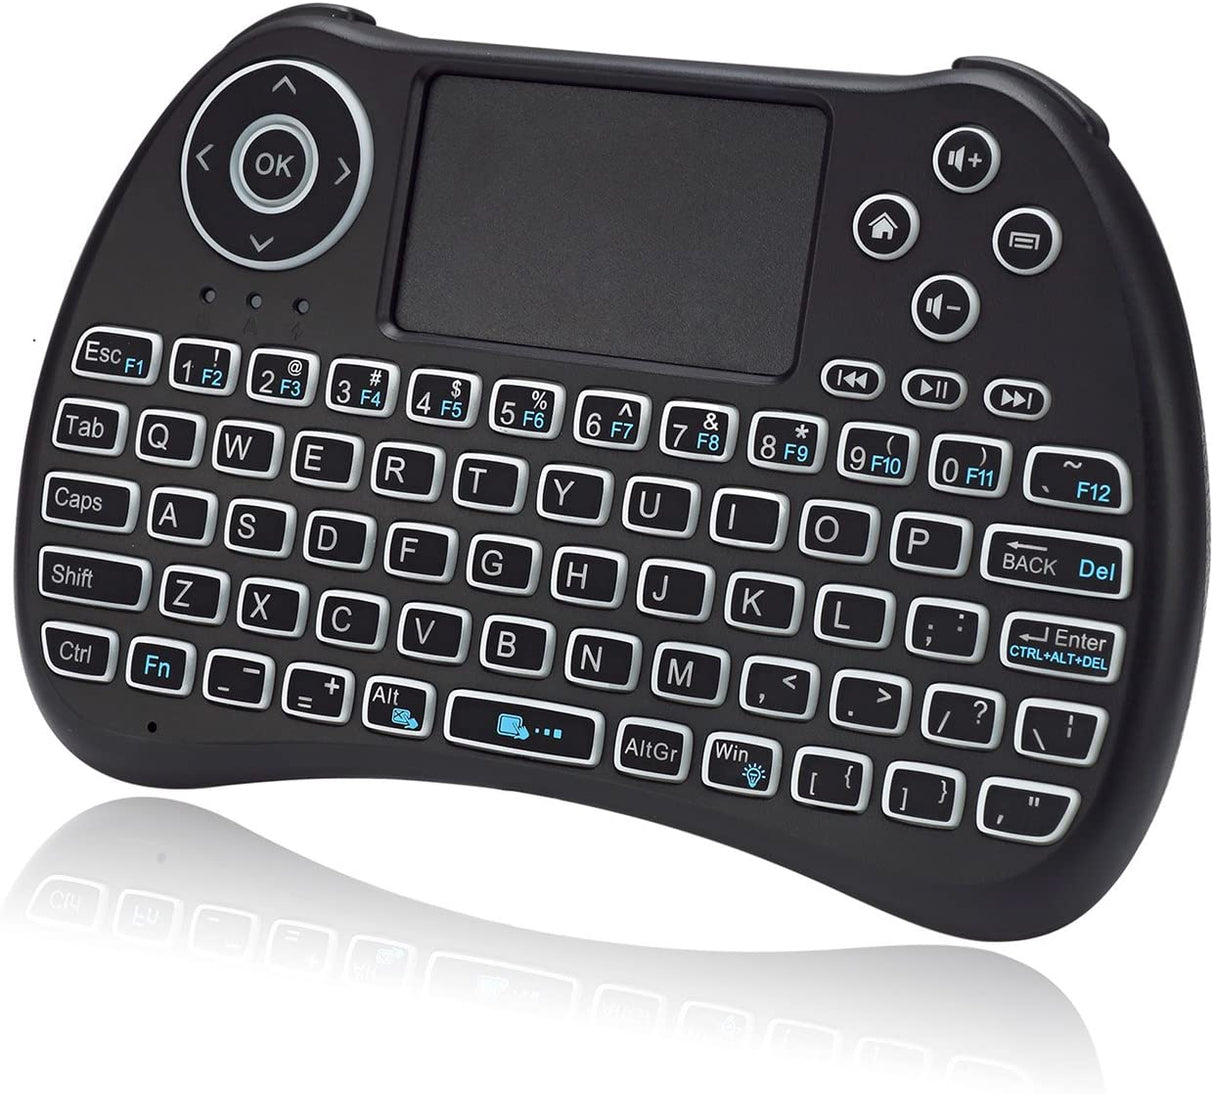 Adesso SlimTouch 4040 - Wireless Illuminated Keyboard Built-in Touchpad - Dealtargets.com